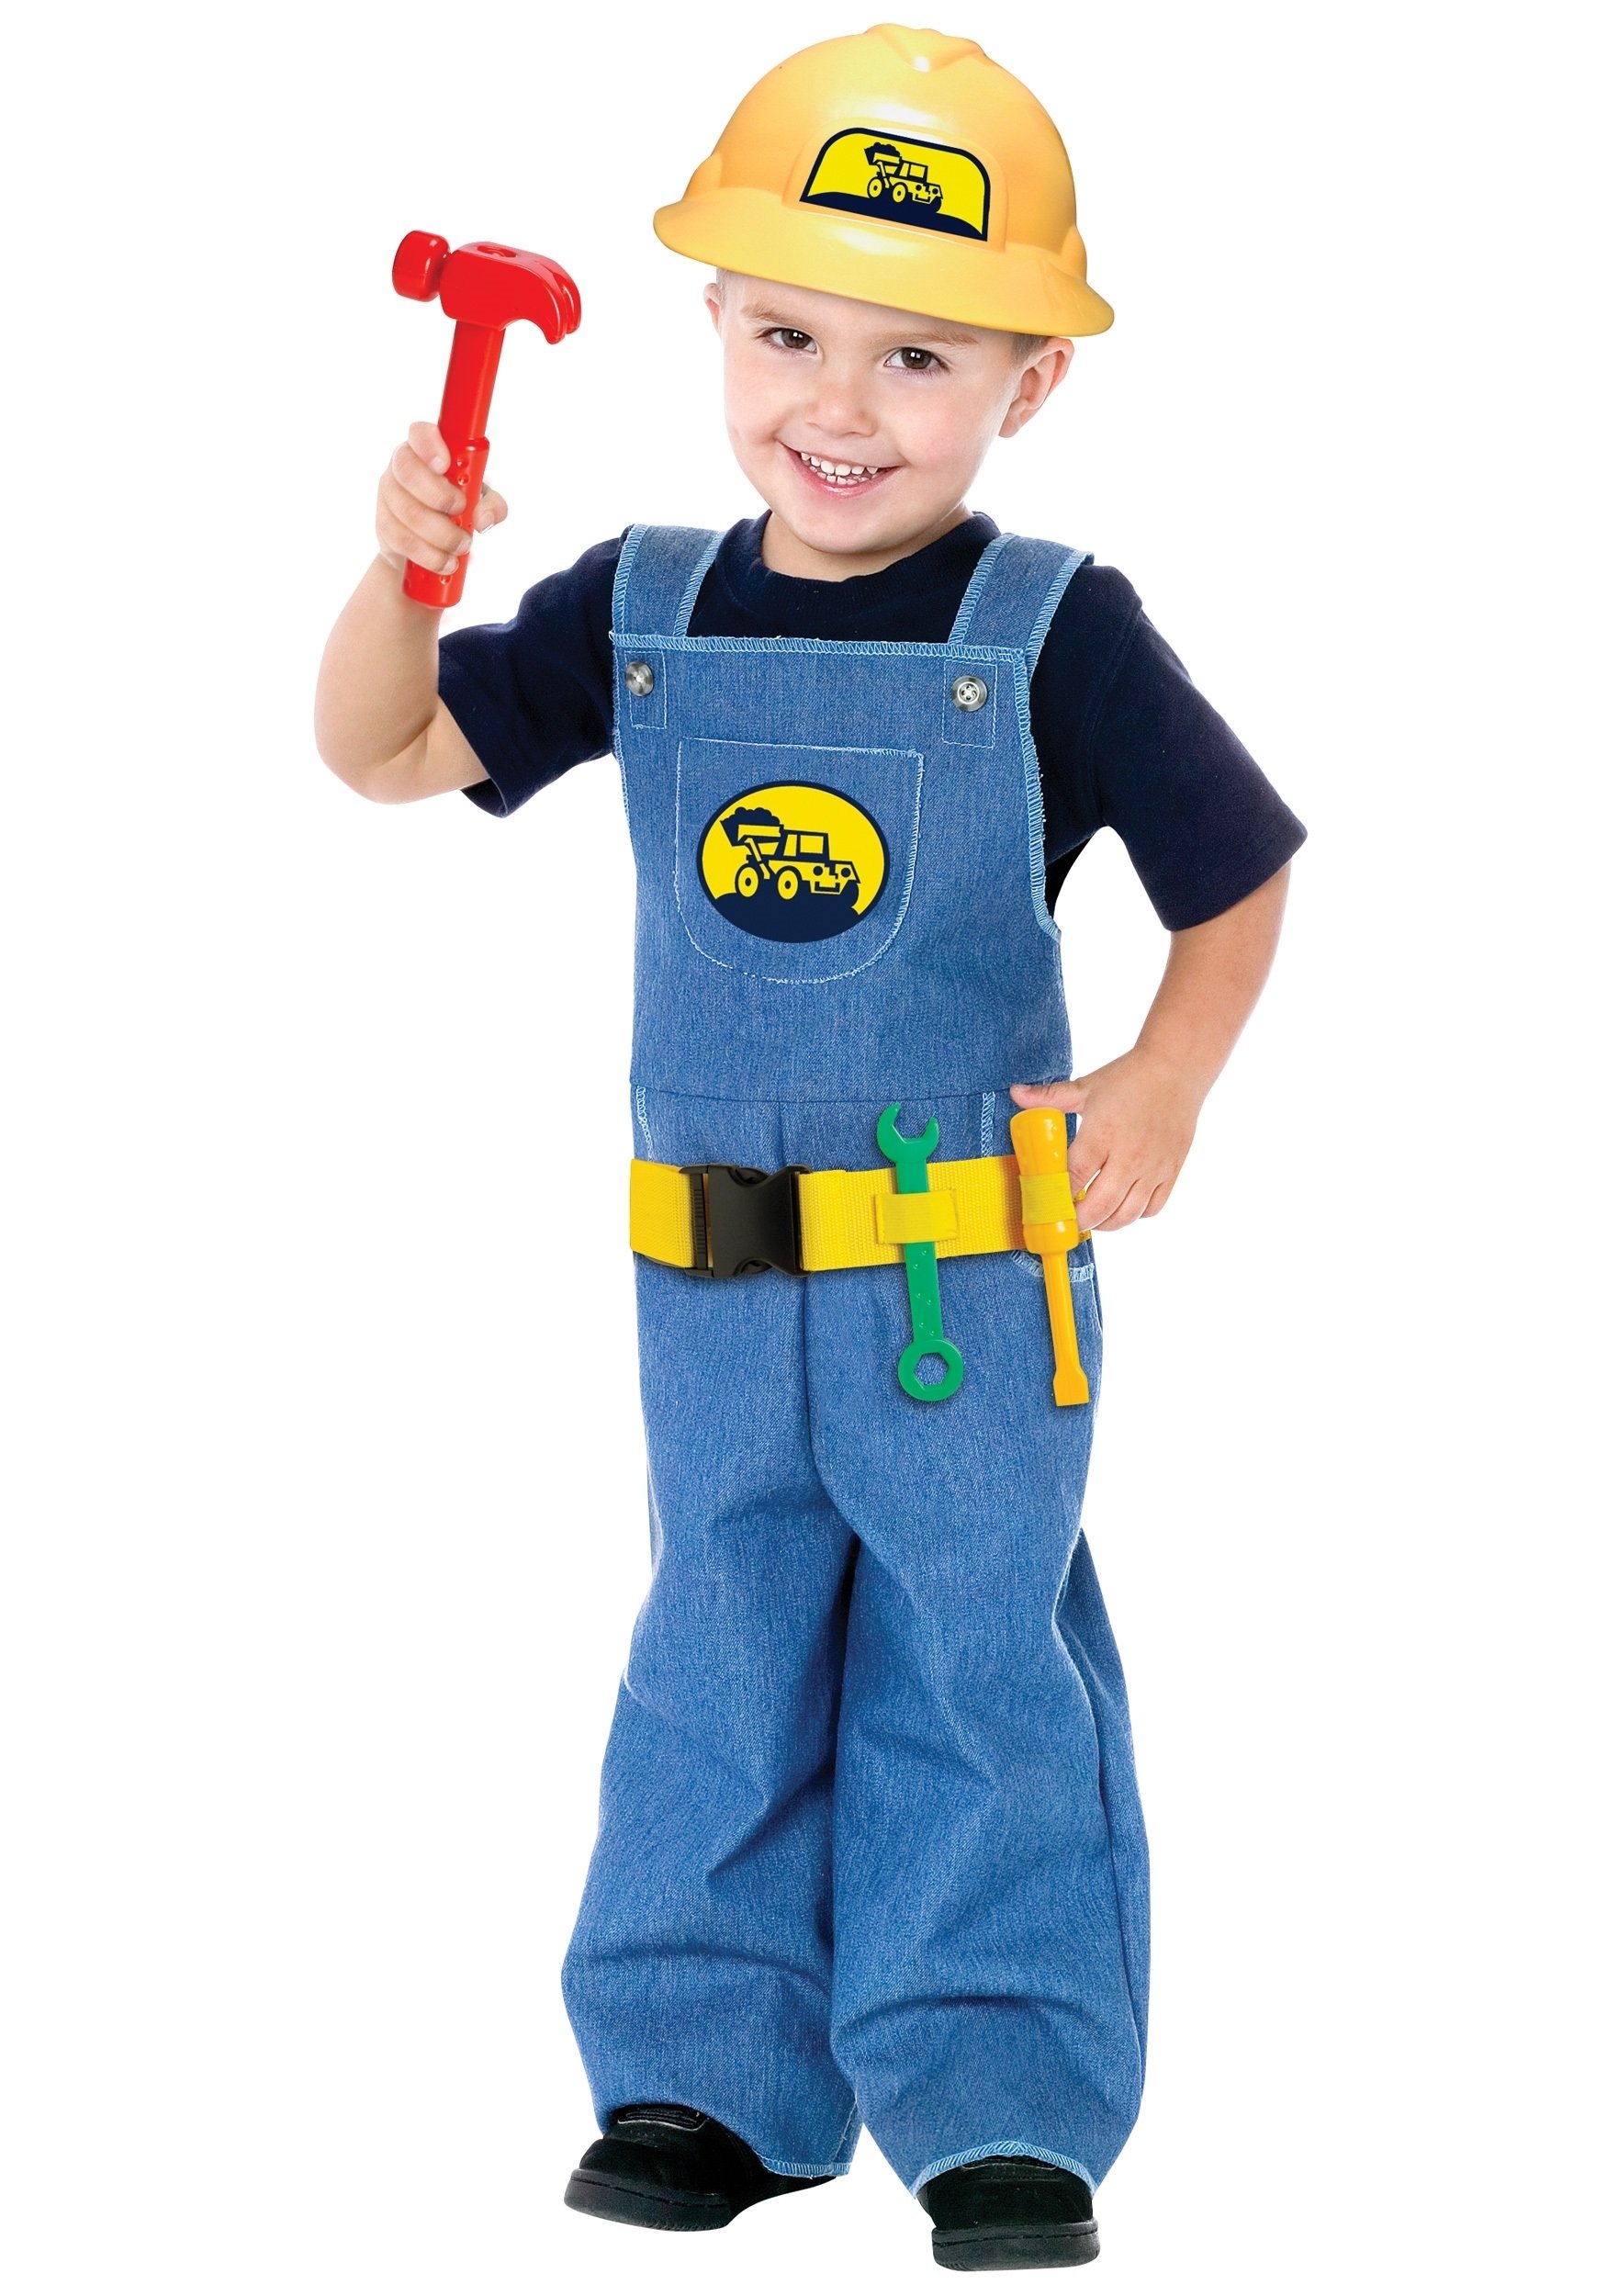 Toddler Boy Costumes Costume Ideas Career Costumes Boys 